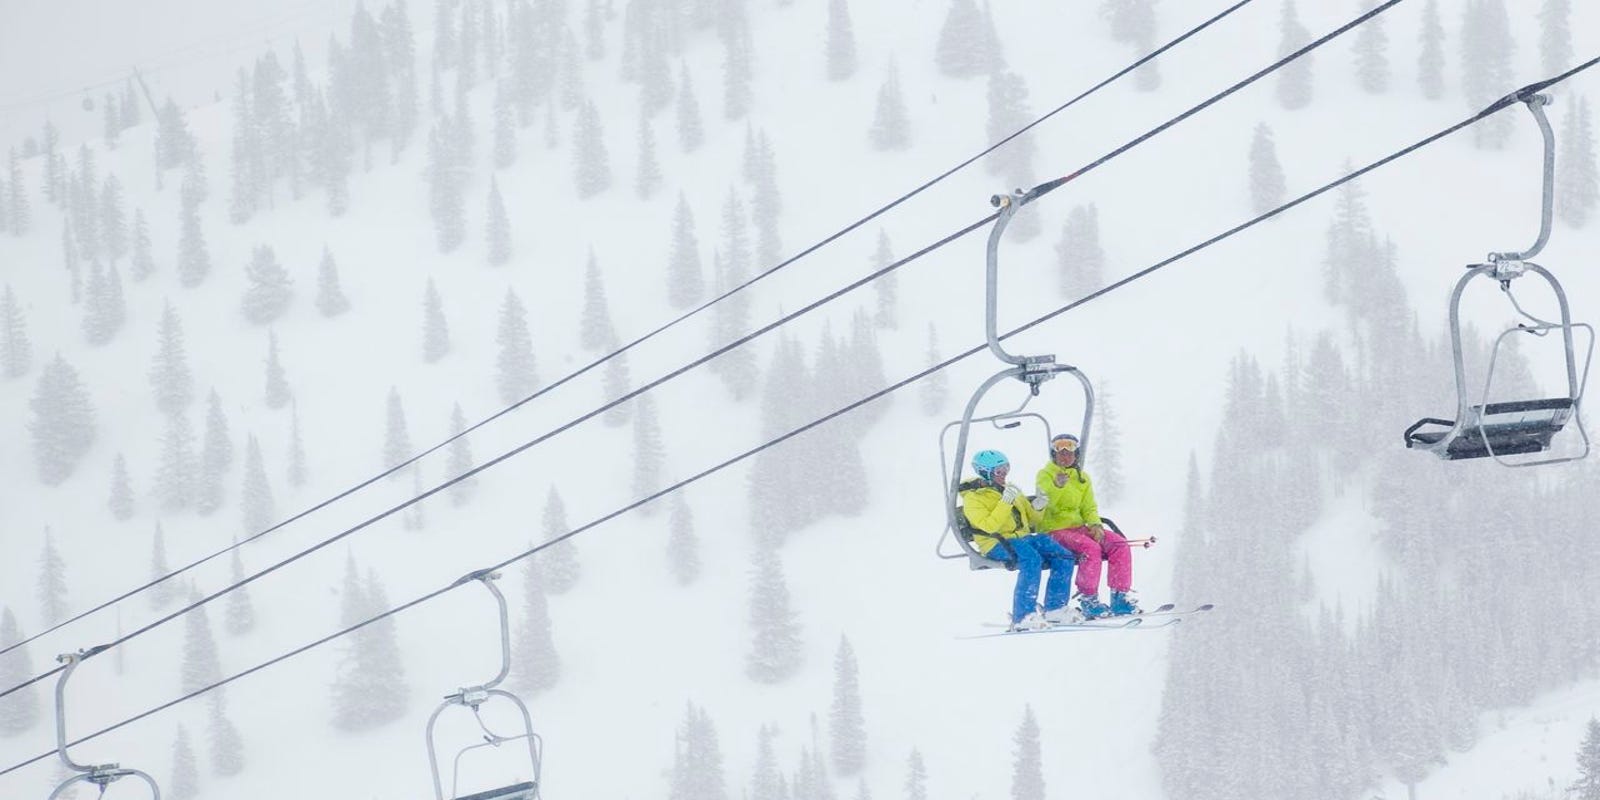 How Dangerous Are Ski Chairlifts